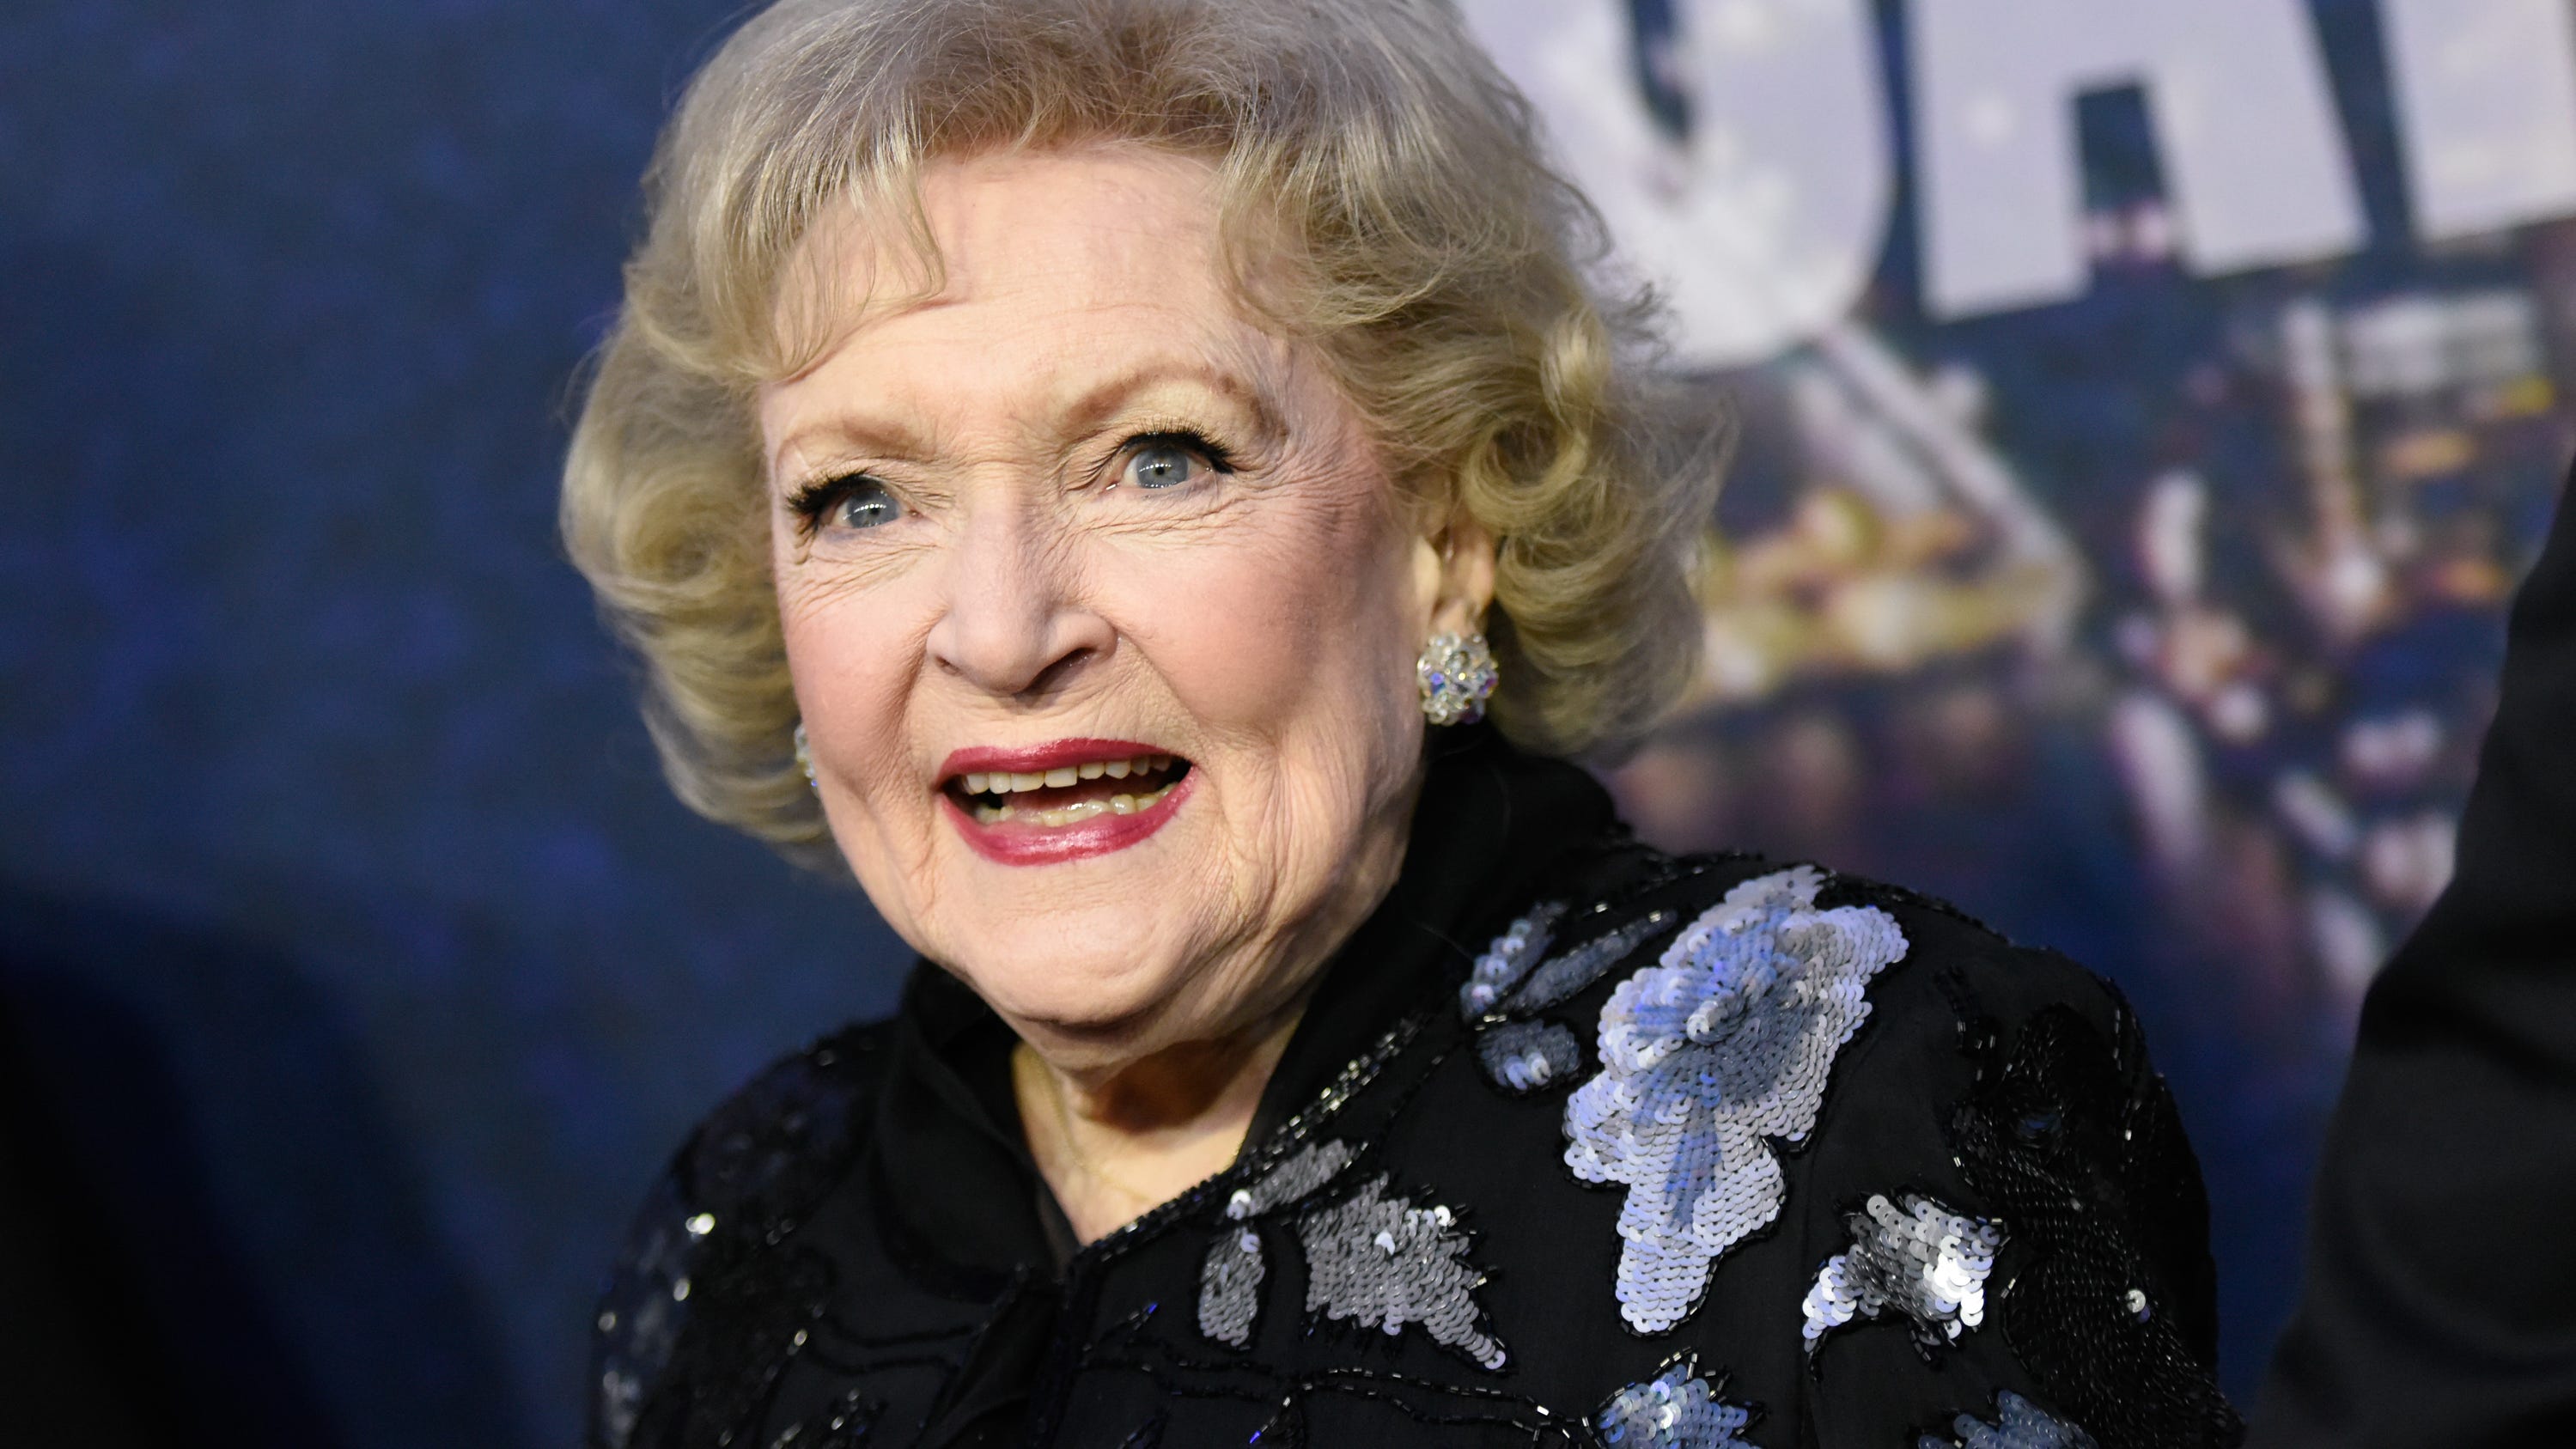 Betty White is turning 99: Her top tips for living a long and healthy life - USA TODAY